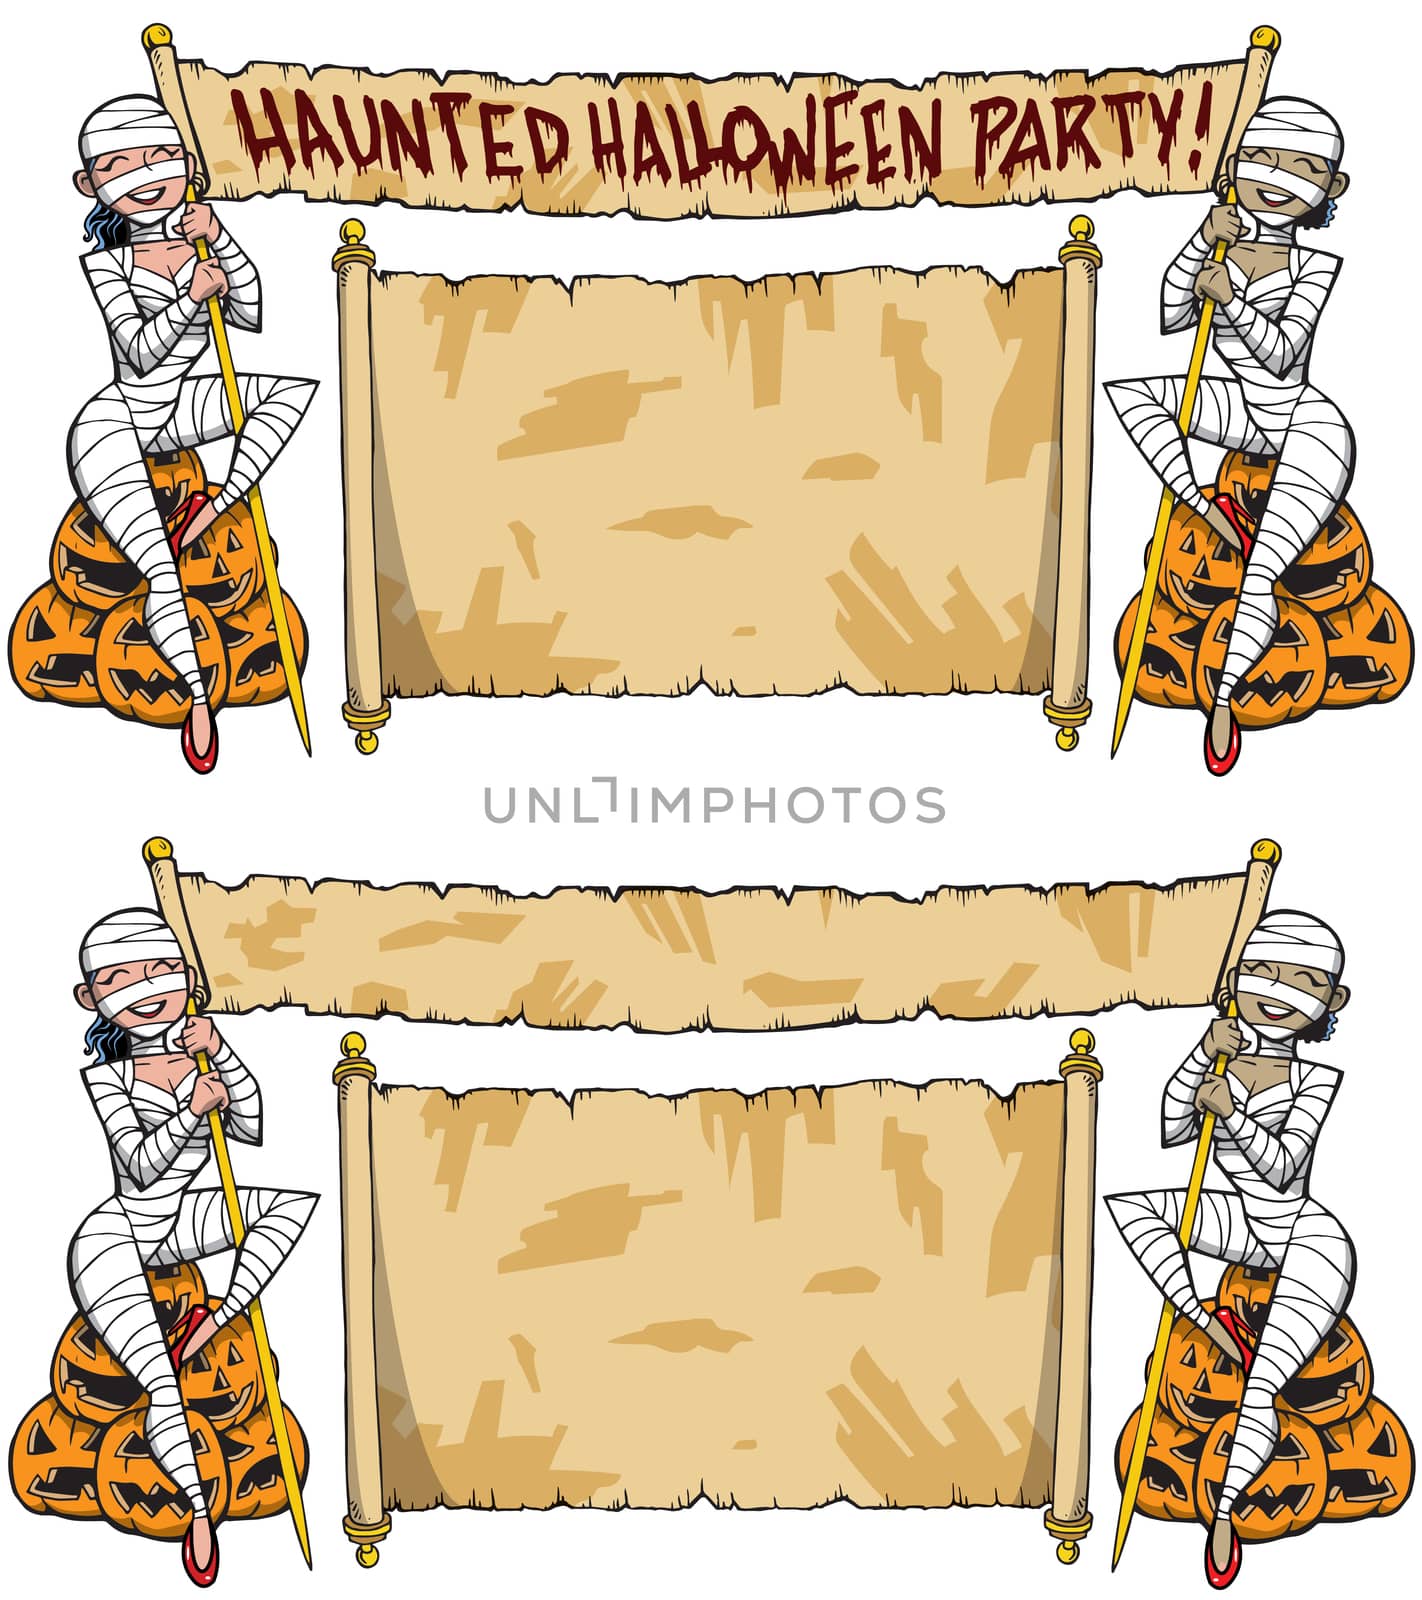 Halloween Haunted House Party by illstudio